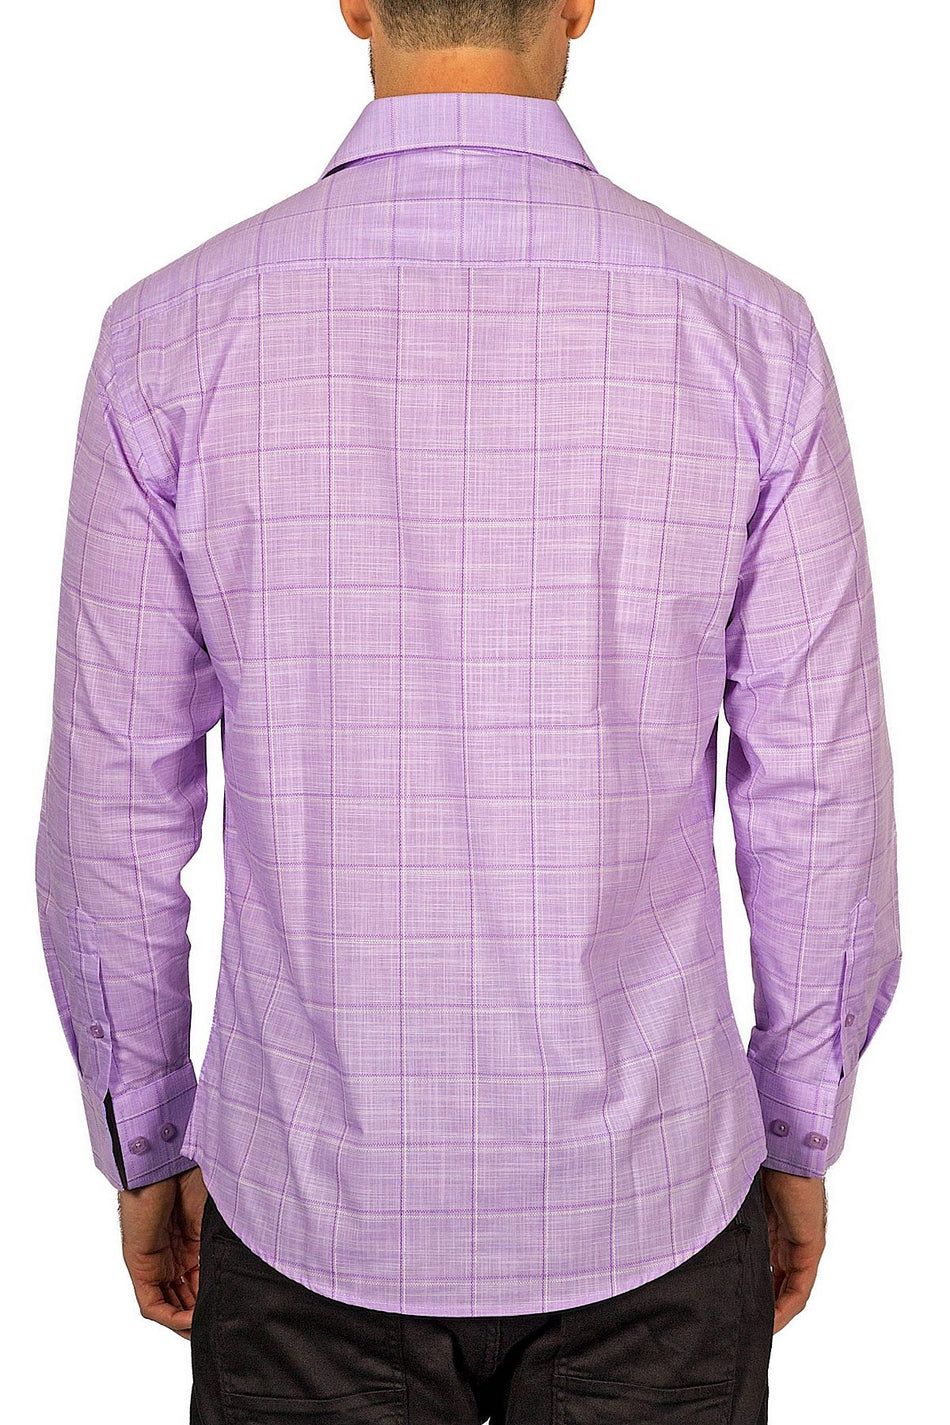 Men's Modern Fit Cotton Button Up Lilac Checkered